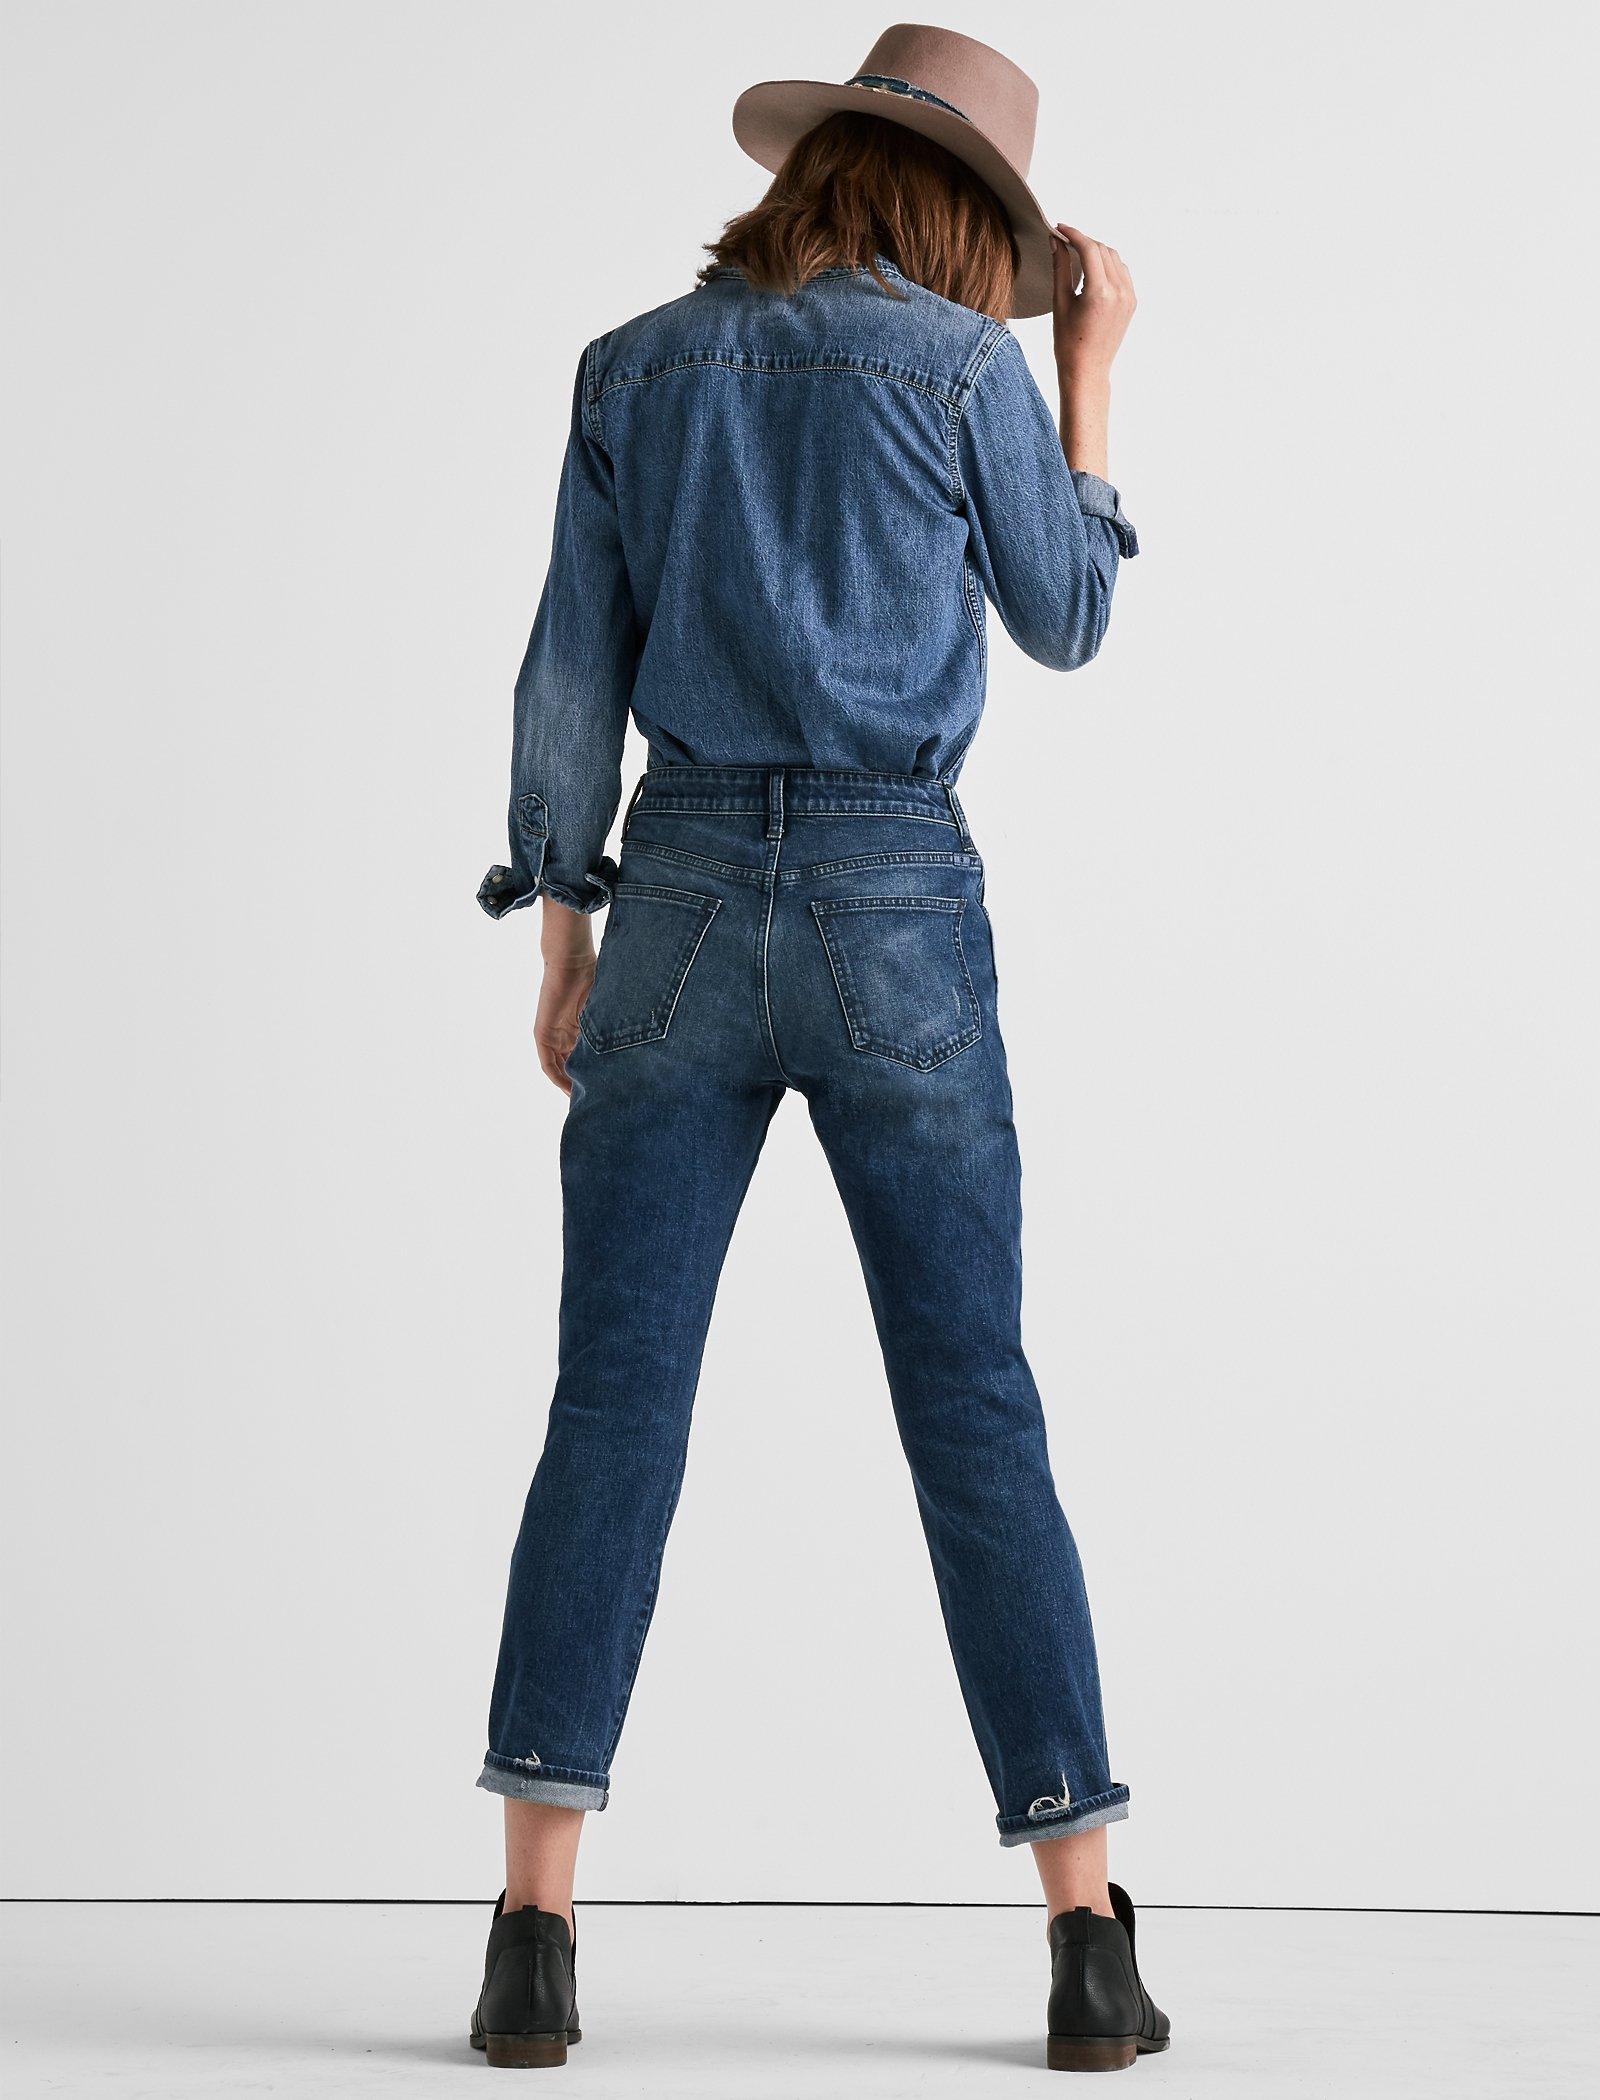 HIGH RISE TOMBOY JEAN IN SOLANO | Lucky Brand